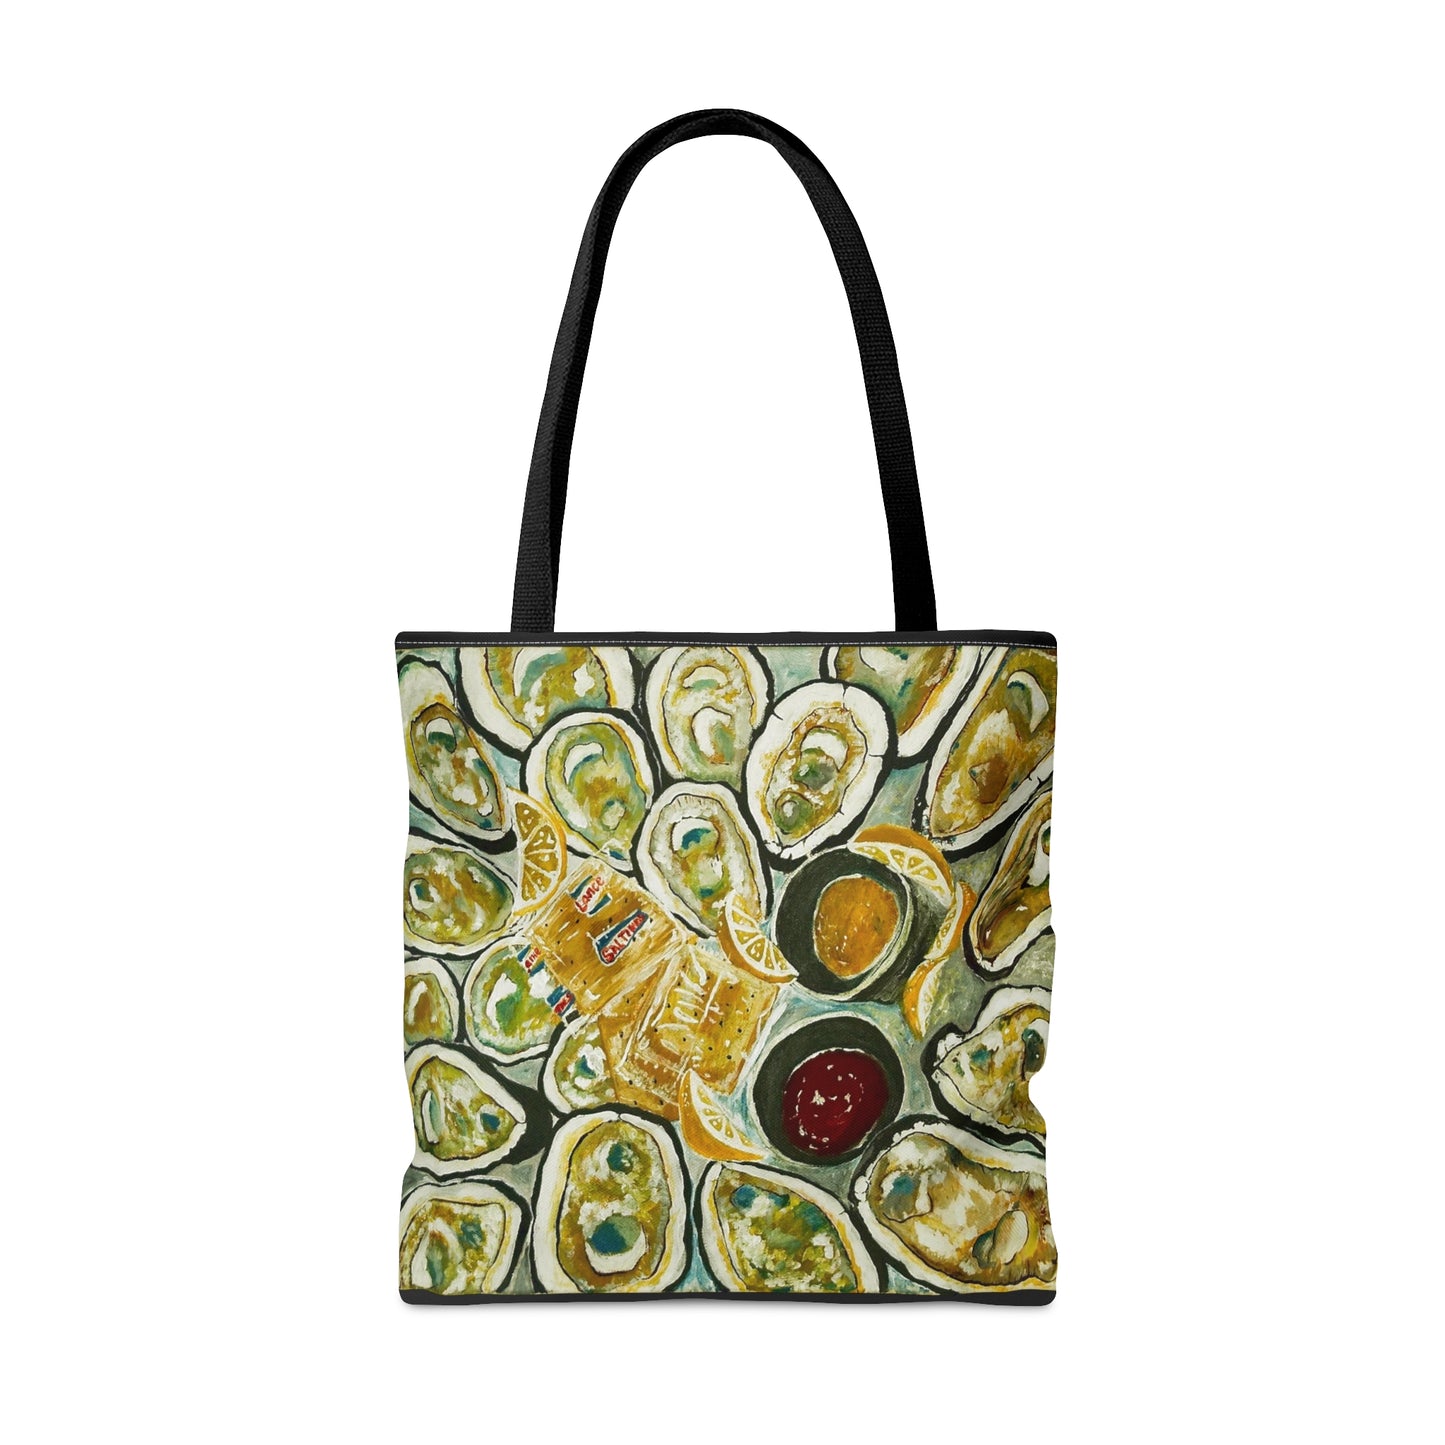 OystersOnTheHalfShell Tote Bag